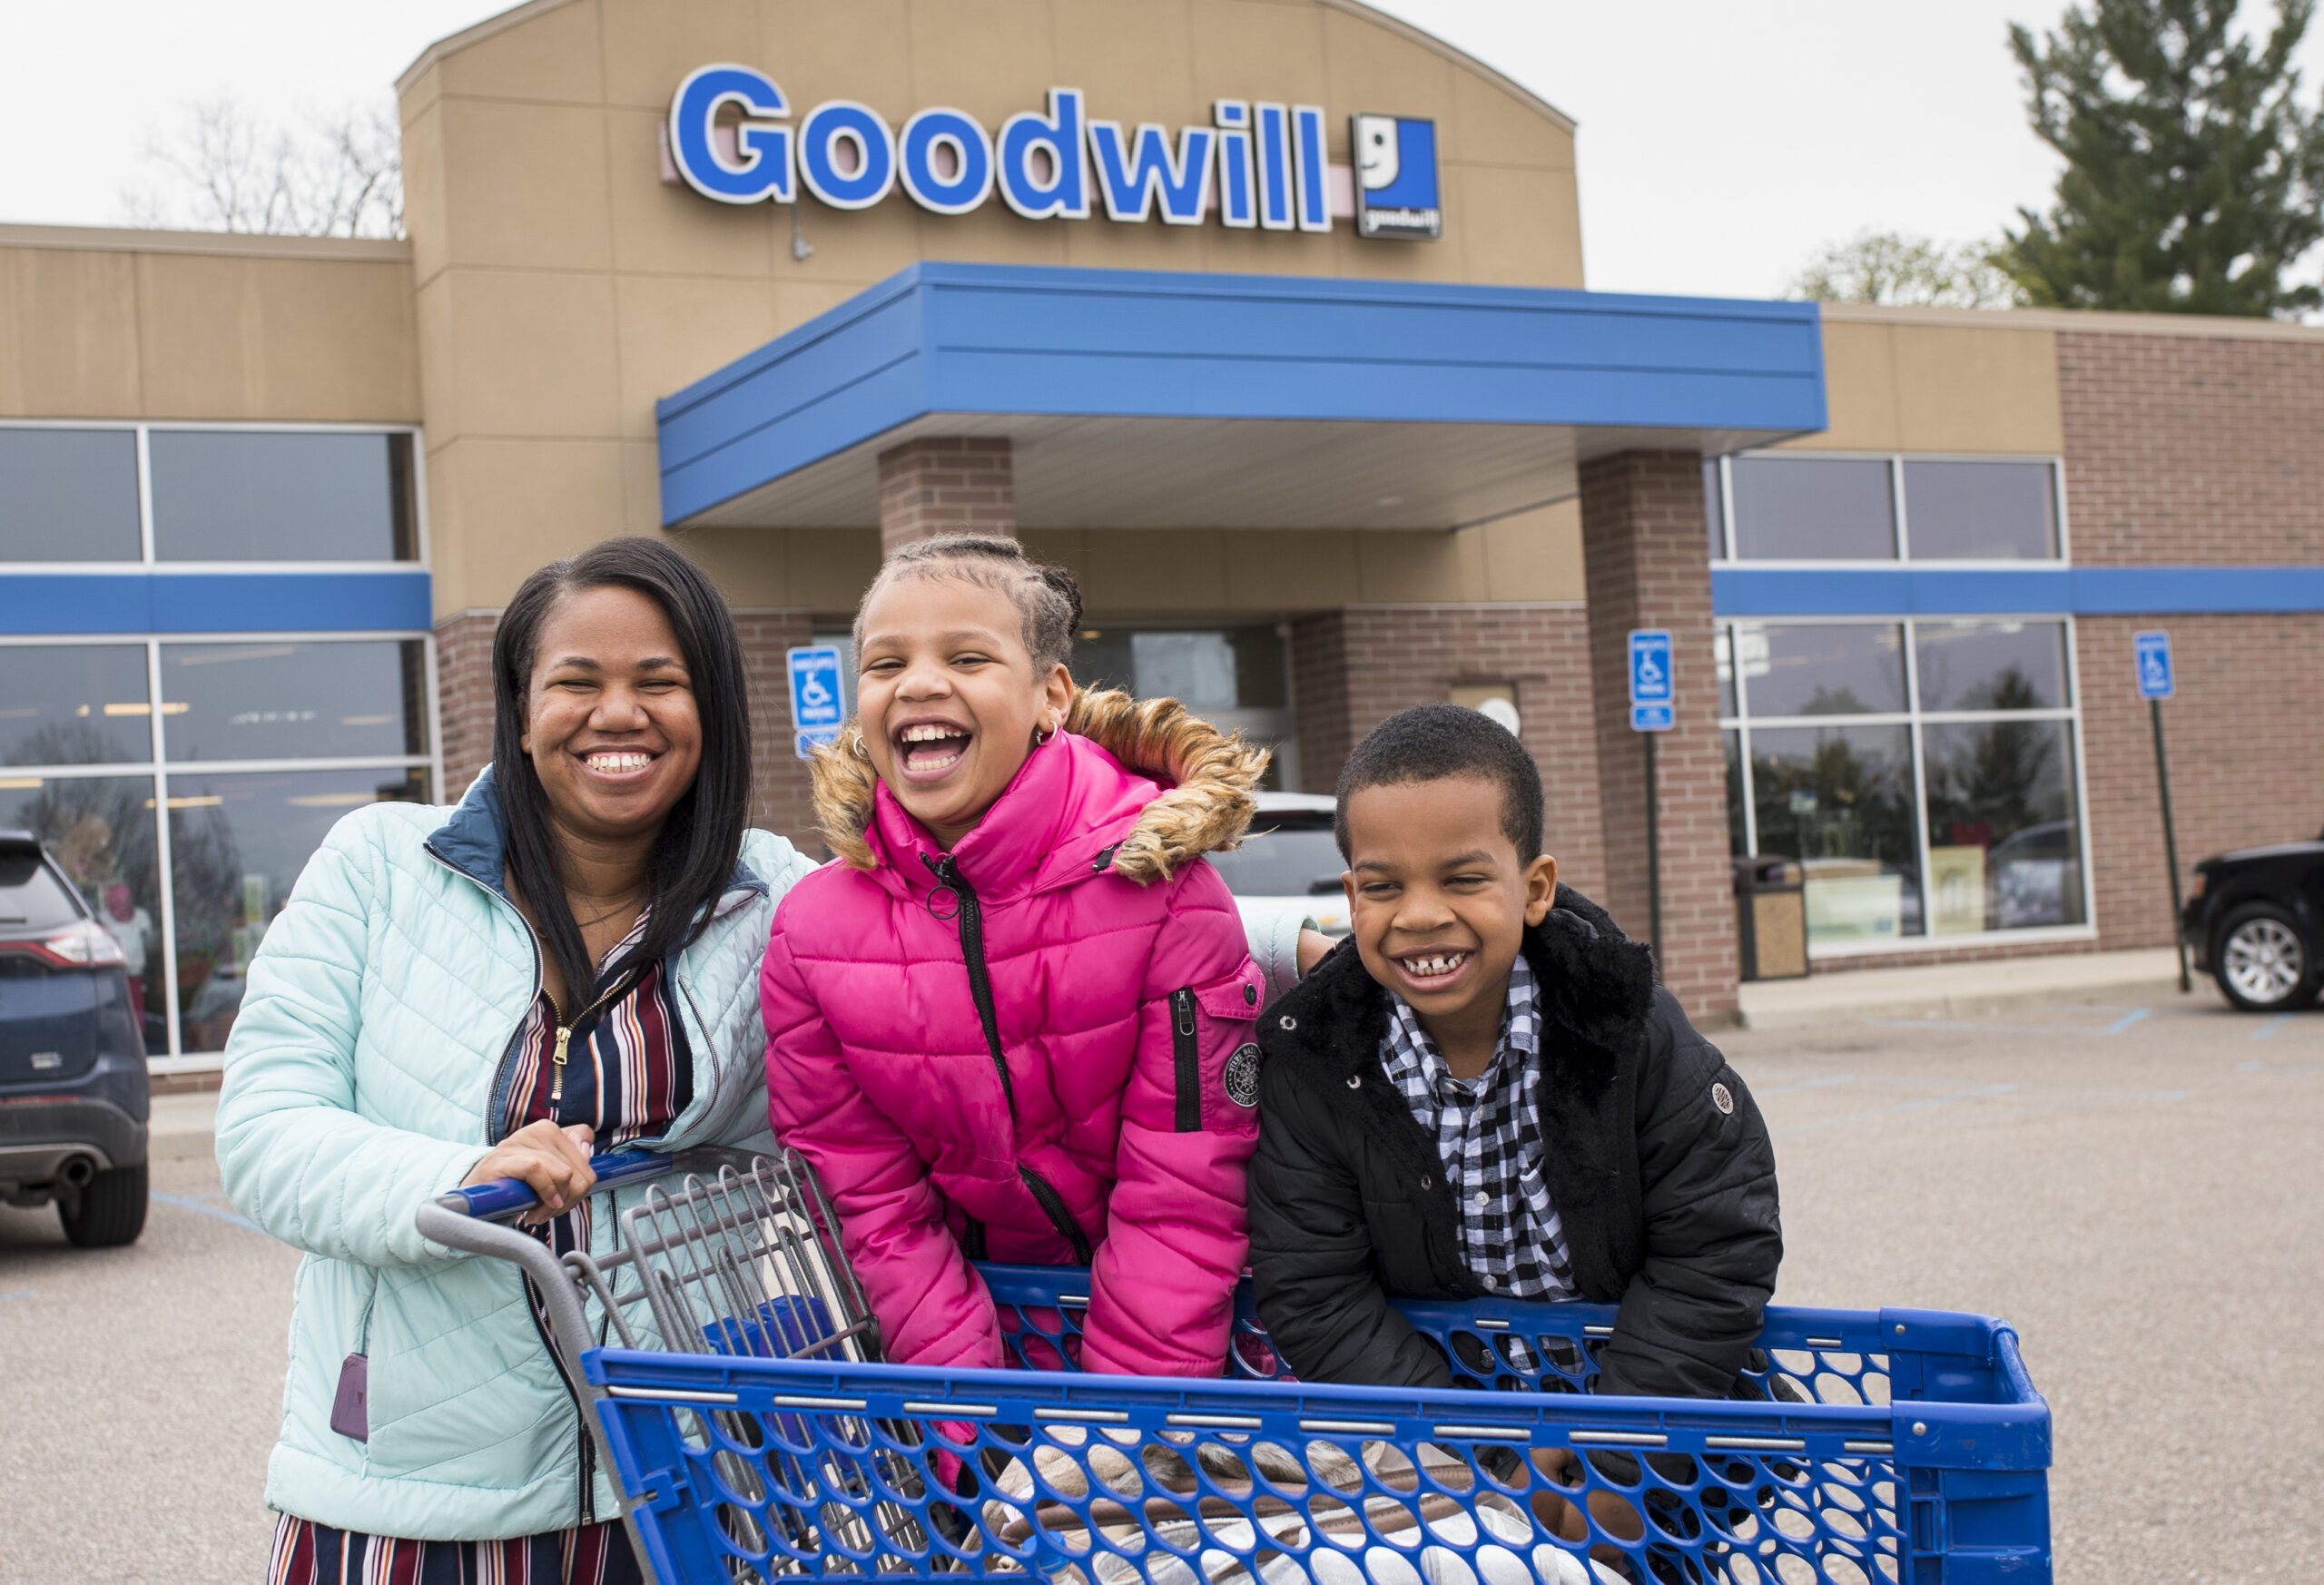 Family leaving Goodwill store with shopping cart